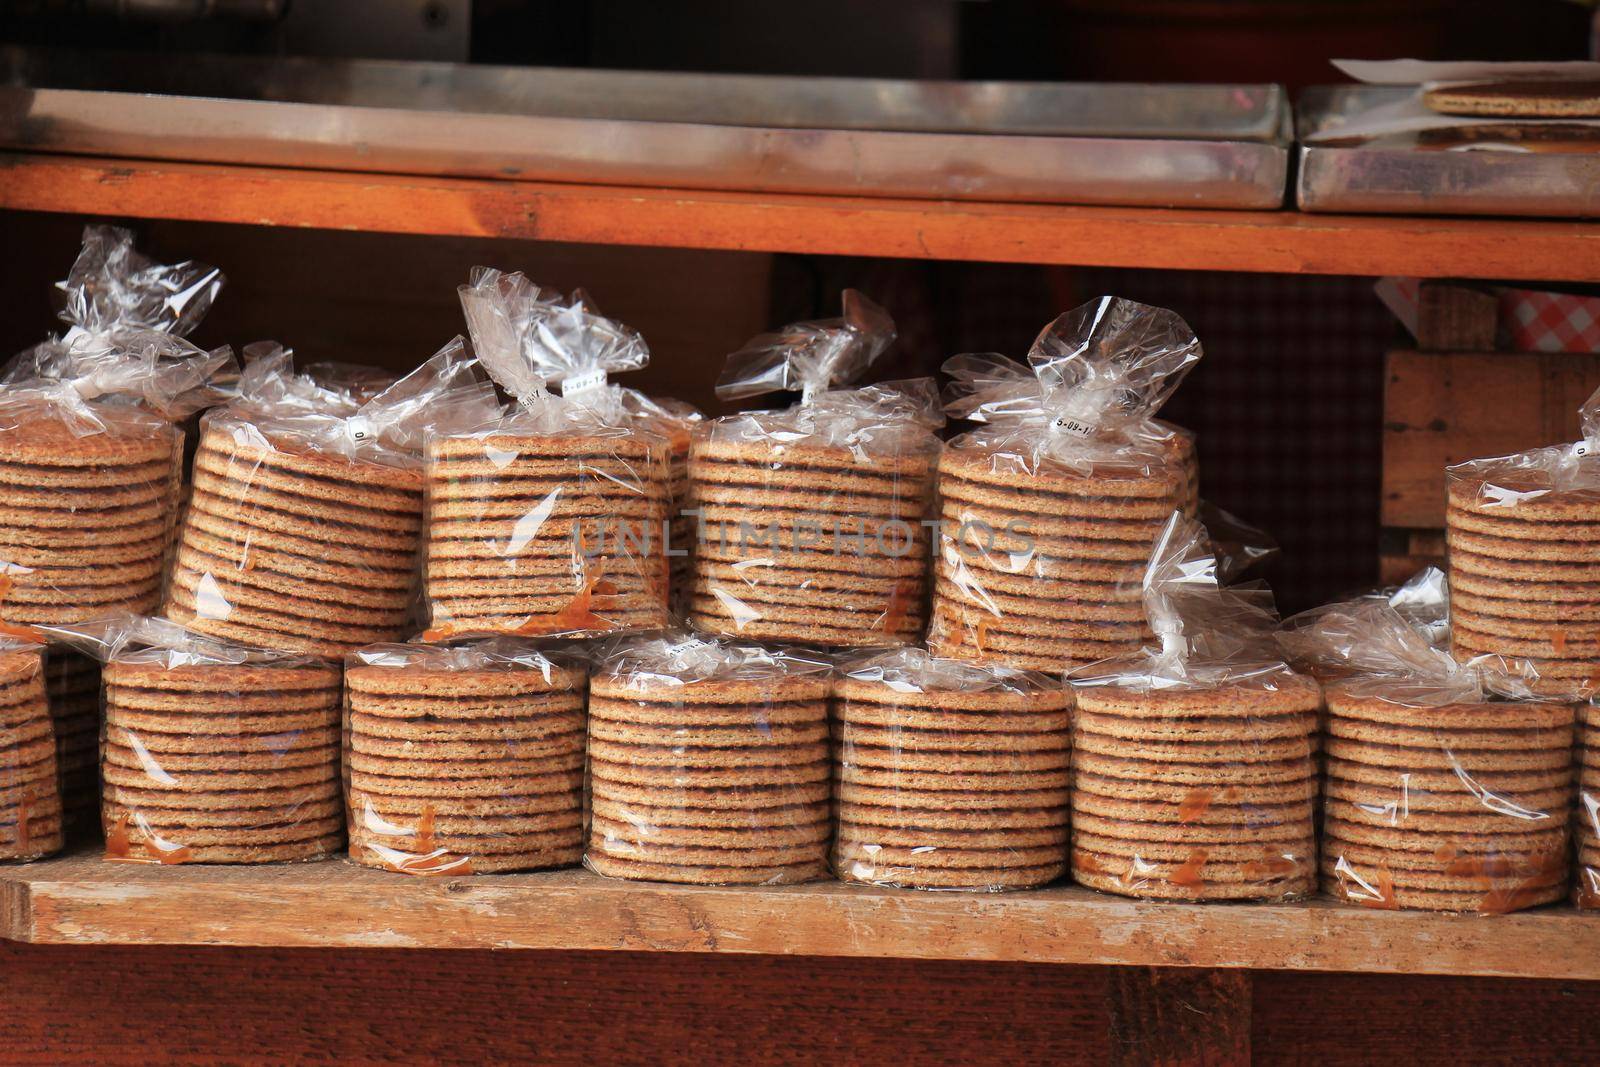 Traditional Dutch stroopwafels, a traditional sweet cookie, filled with caramel syrup. These are wrapped in plastic to keep them soft. Text in the small closing clip is the "best before" date